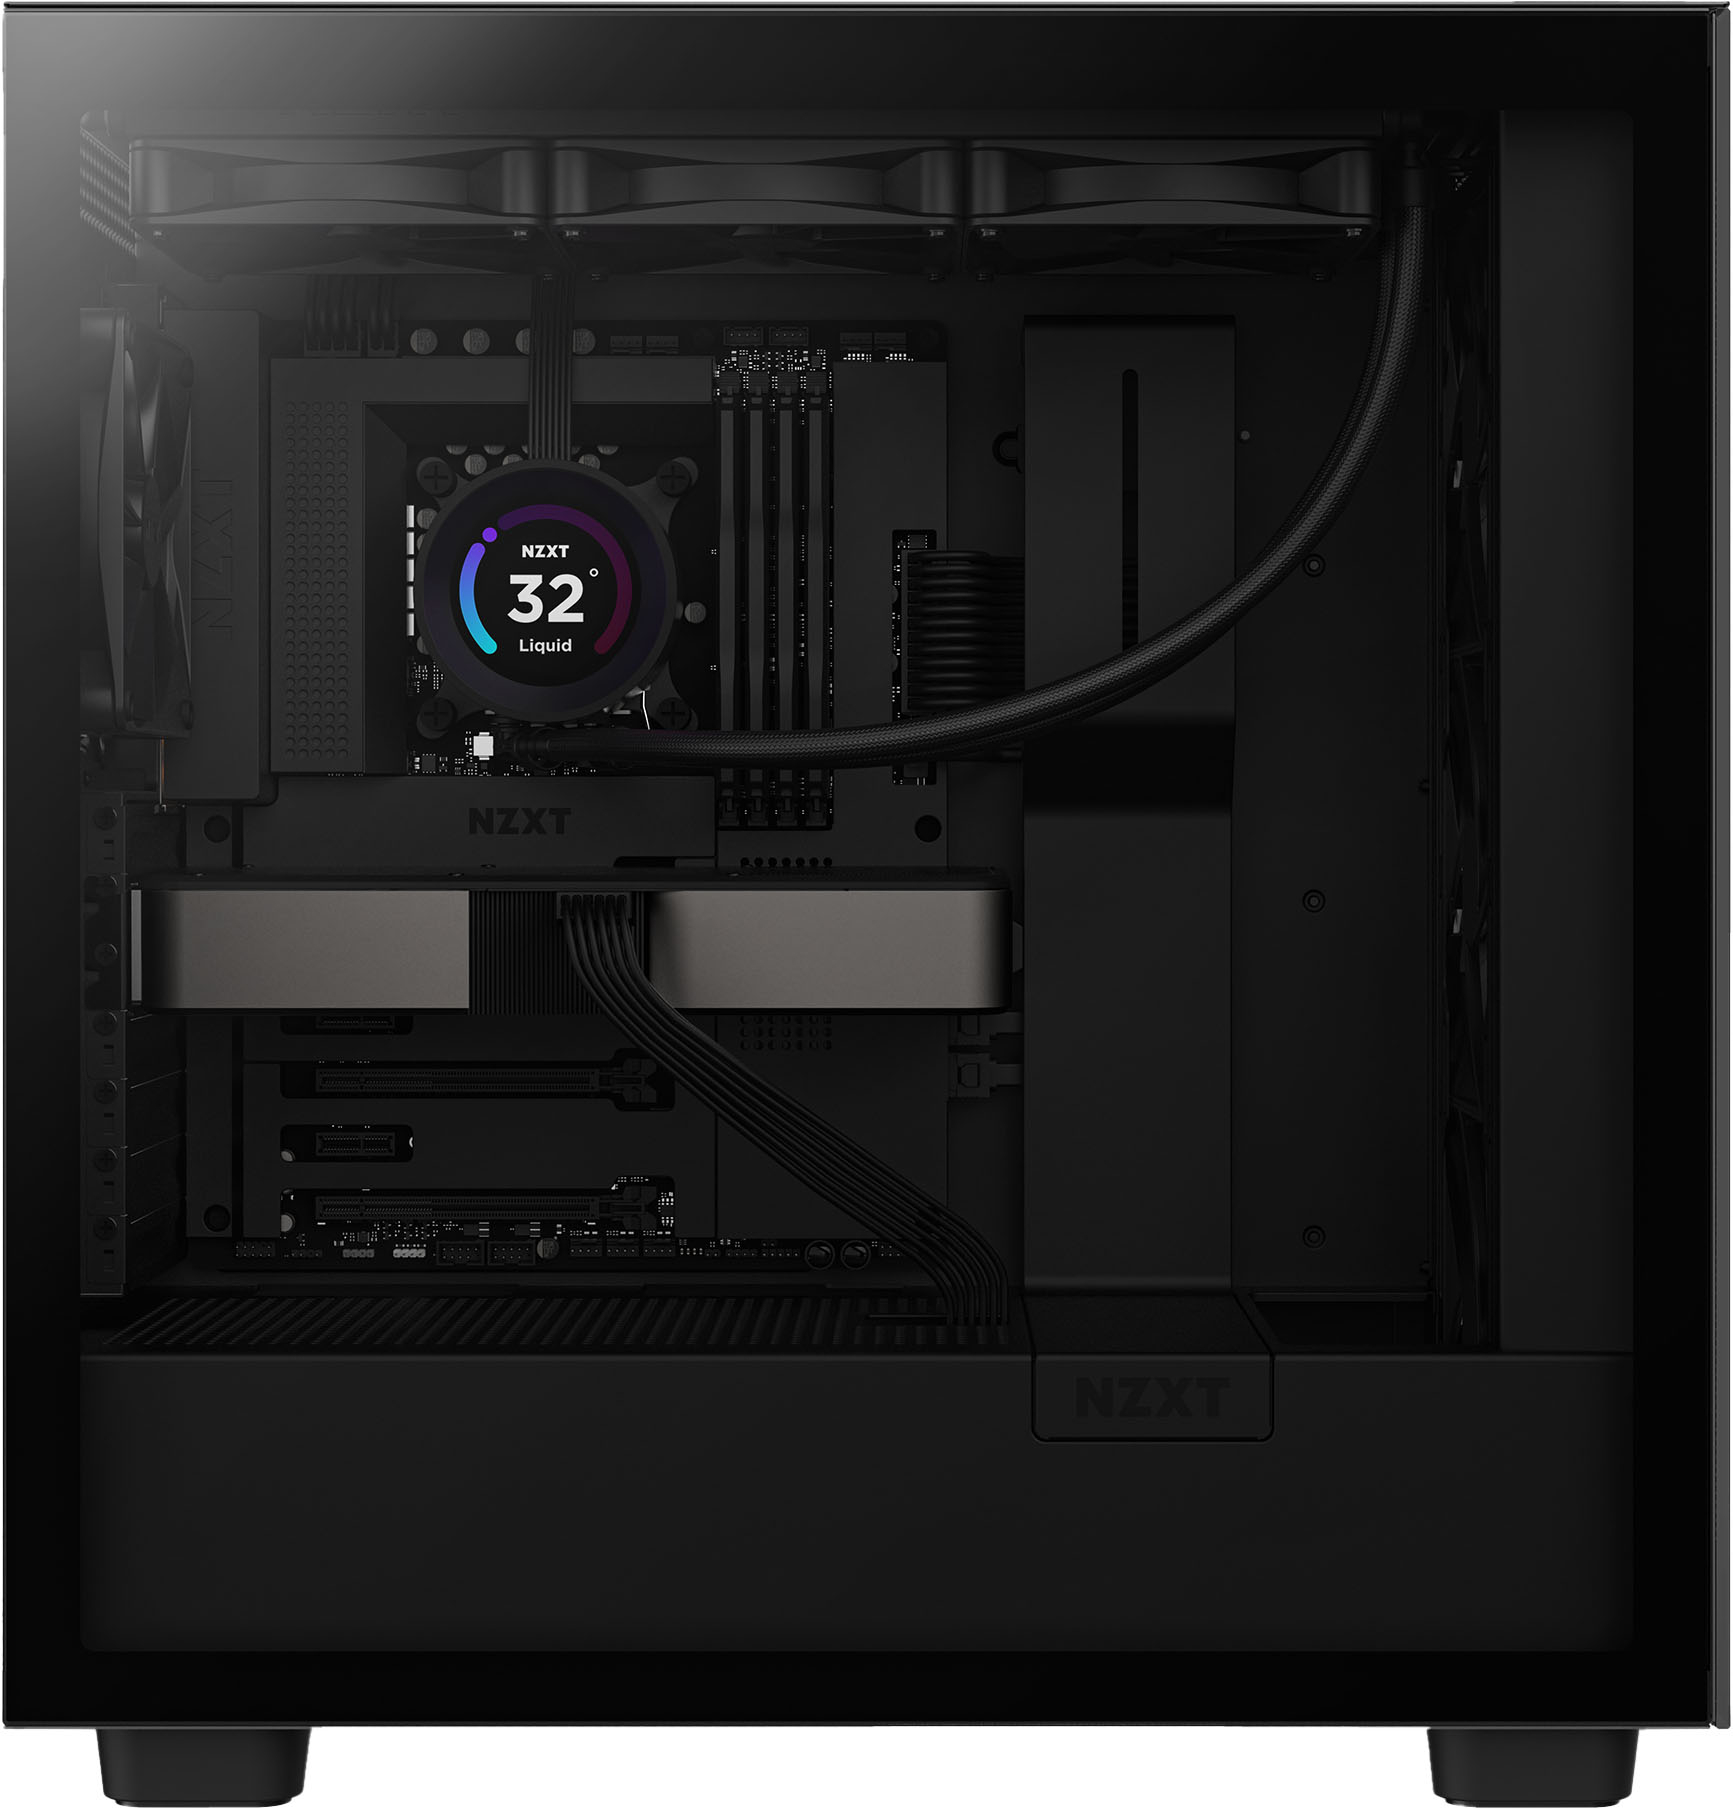 NZXT Kraken 360 120mm Fans + AIO 360mm Radiator Liquid Cooling System with  1.54 LCD display and RGB Fans White RL-KR360-W1 - Best Buy